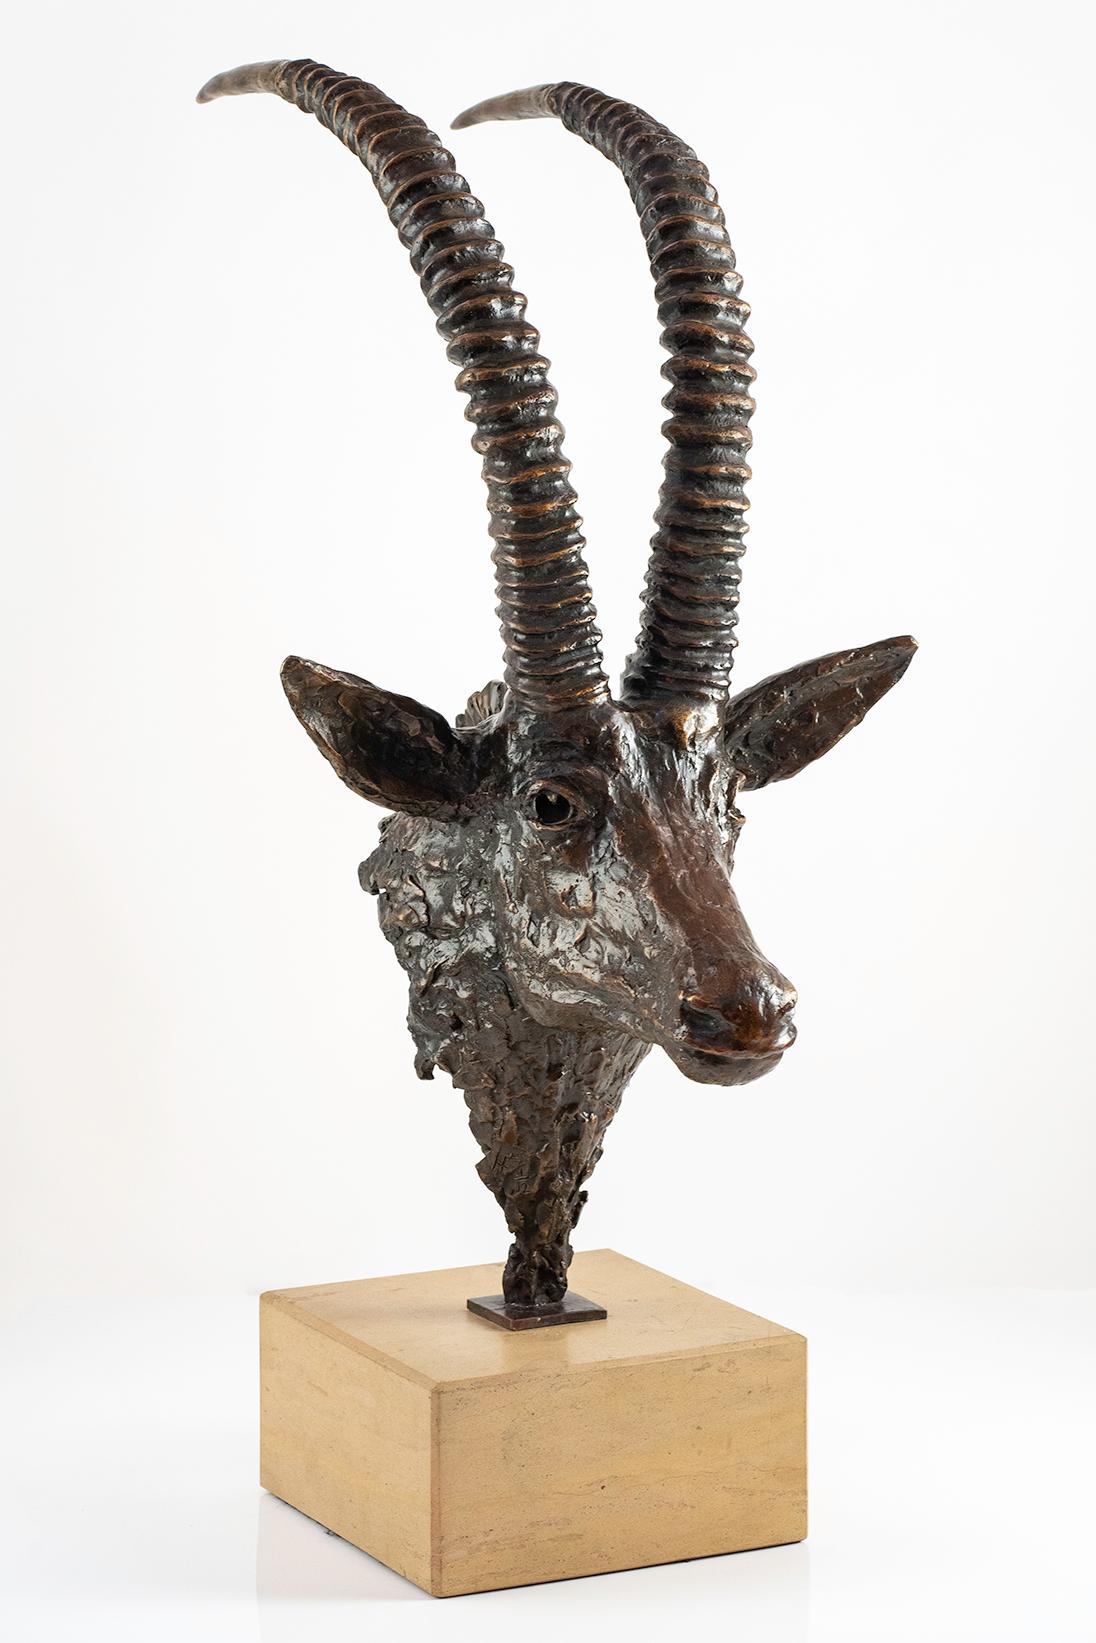 Sable Antelope Bust - African Wildlife Sculpture - Limited Bronze Edition - Gold Figurative Sculpture by Heinrich Filter